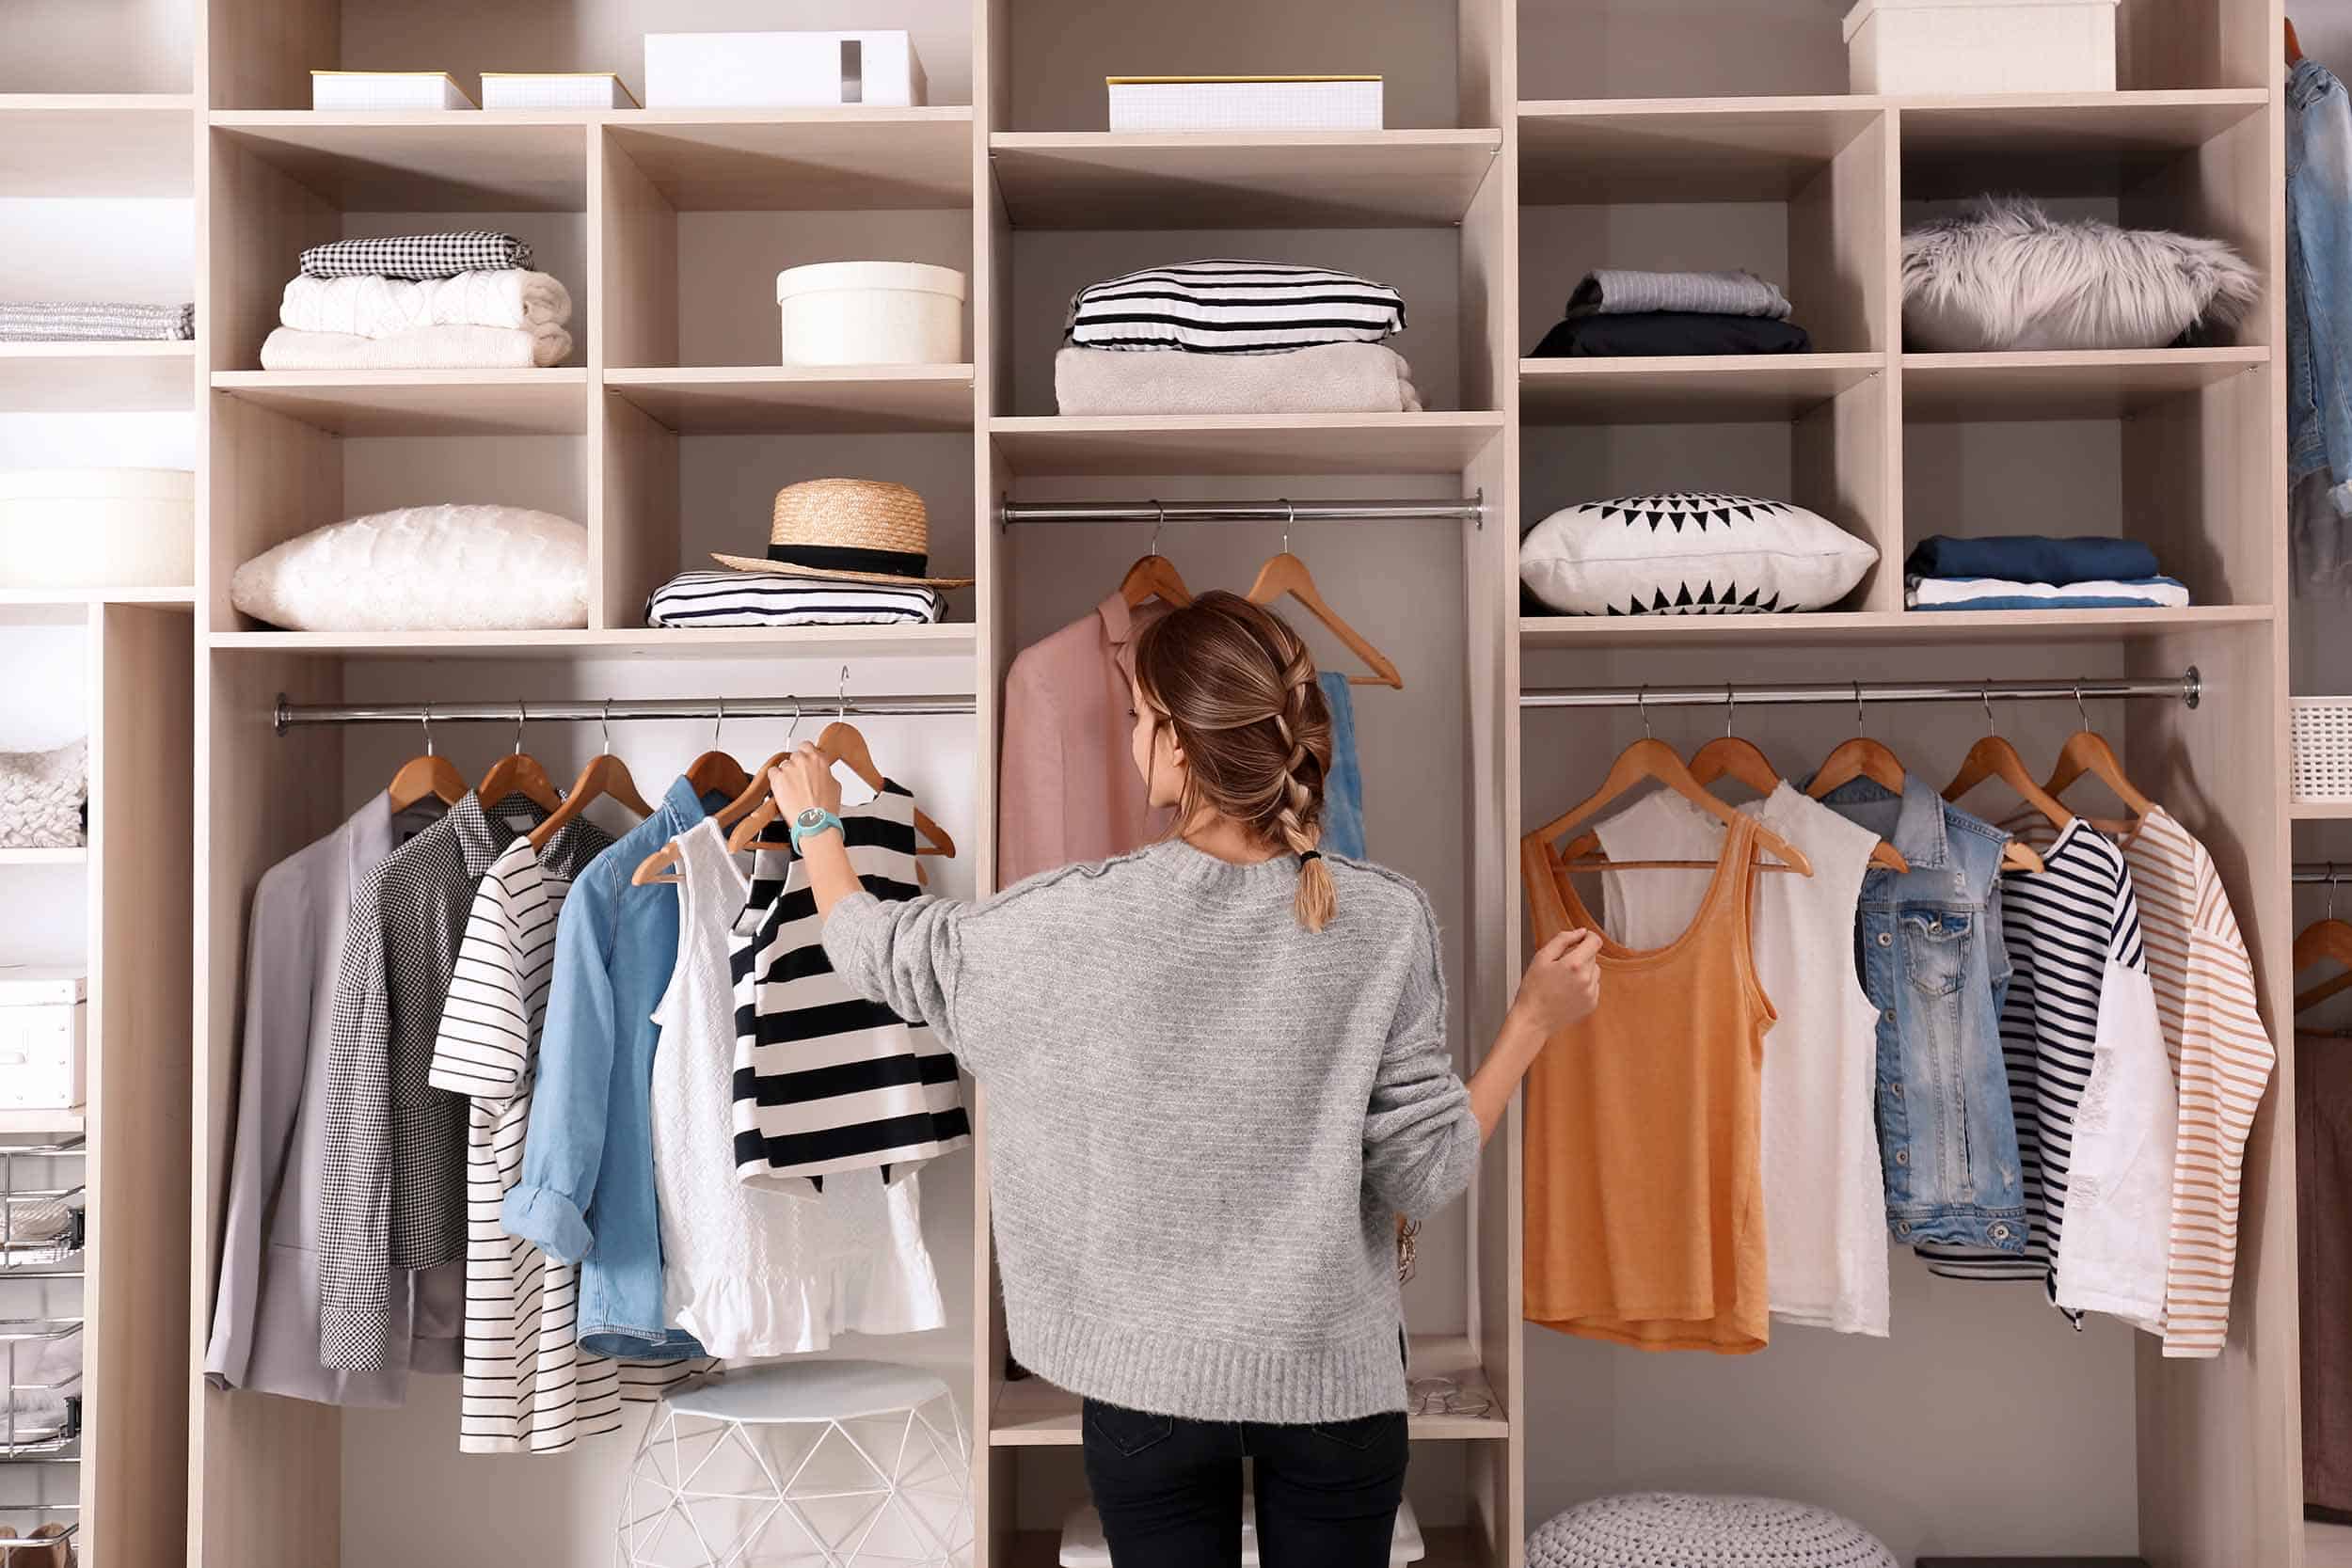 The beginner’s guide to a more Sustainable Wardrobe